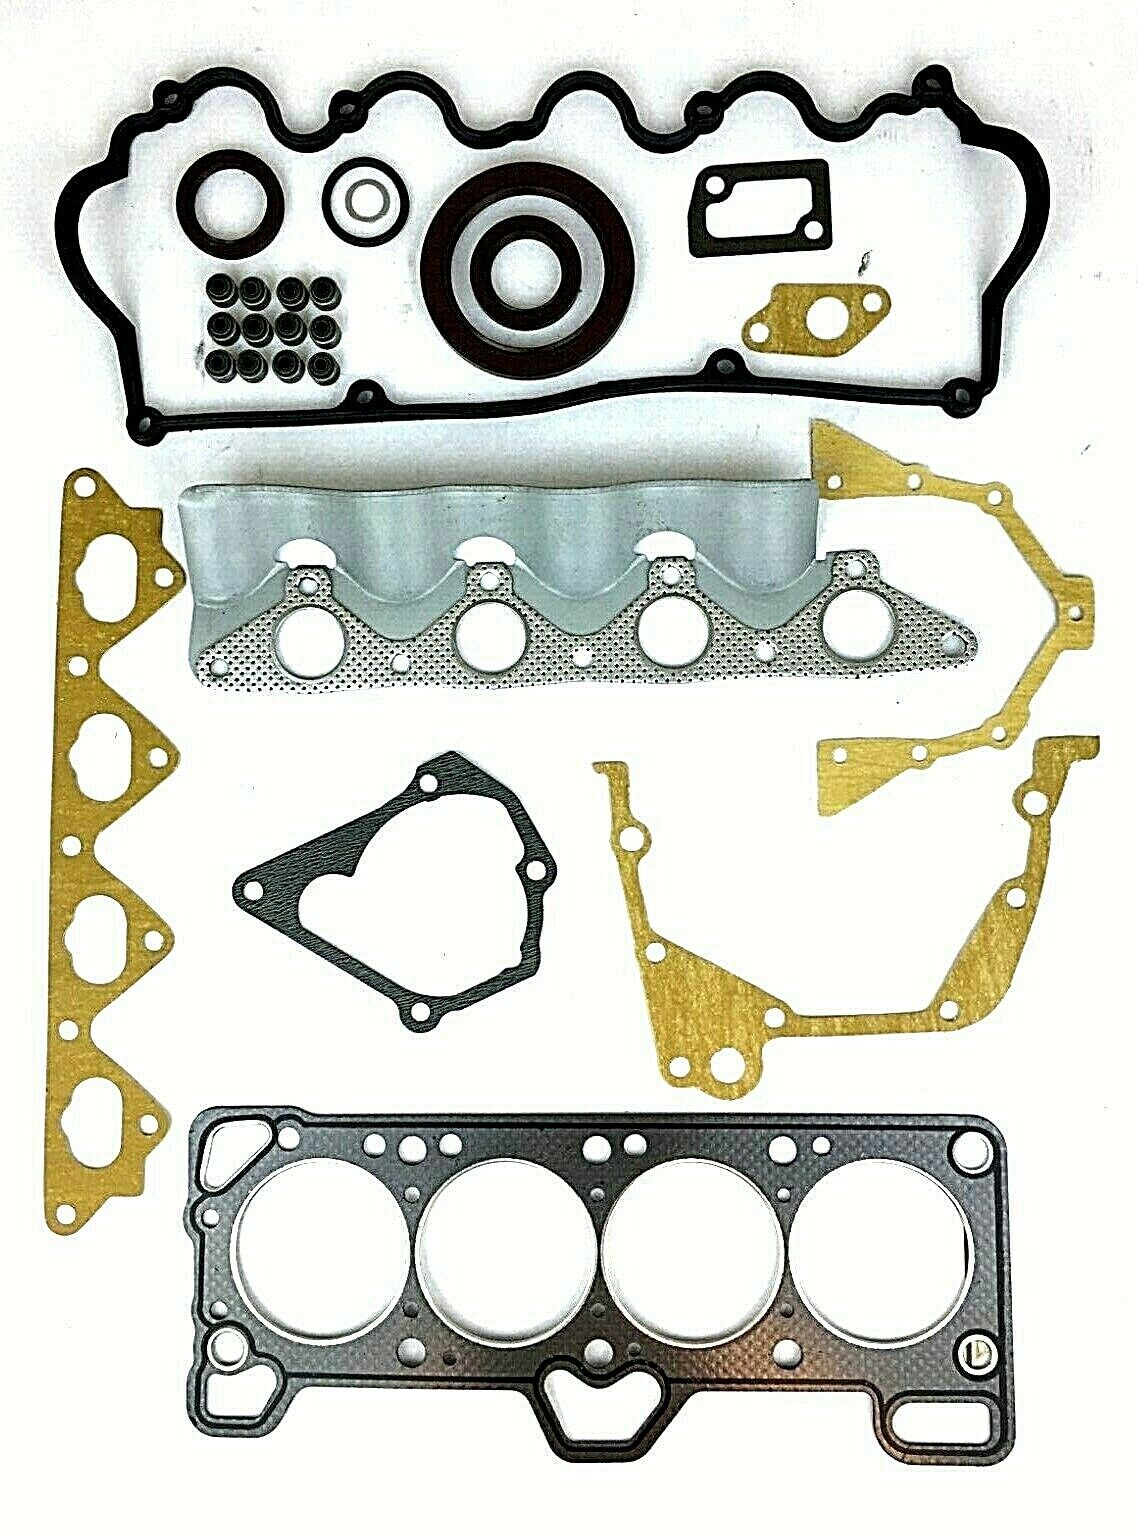 New Gaskets Kit Complete 20910-22a10 For Accent L4 1.5l (2522)